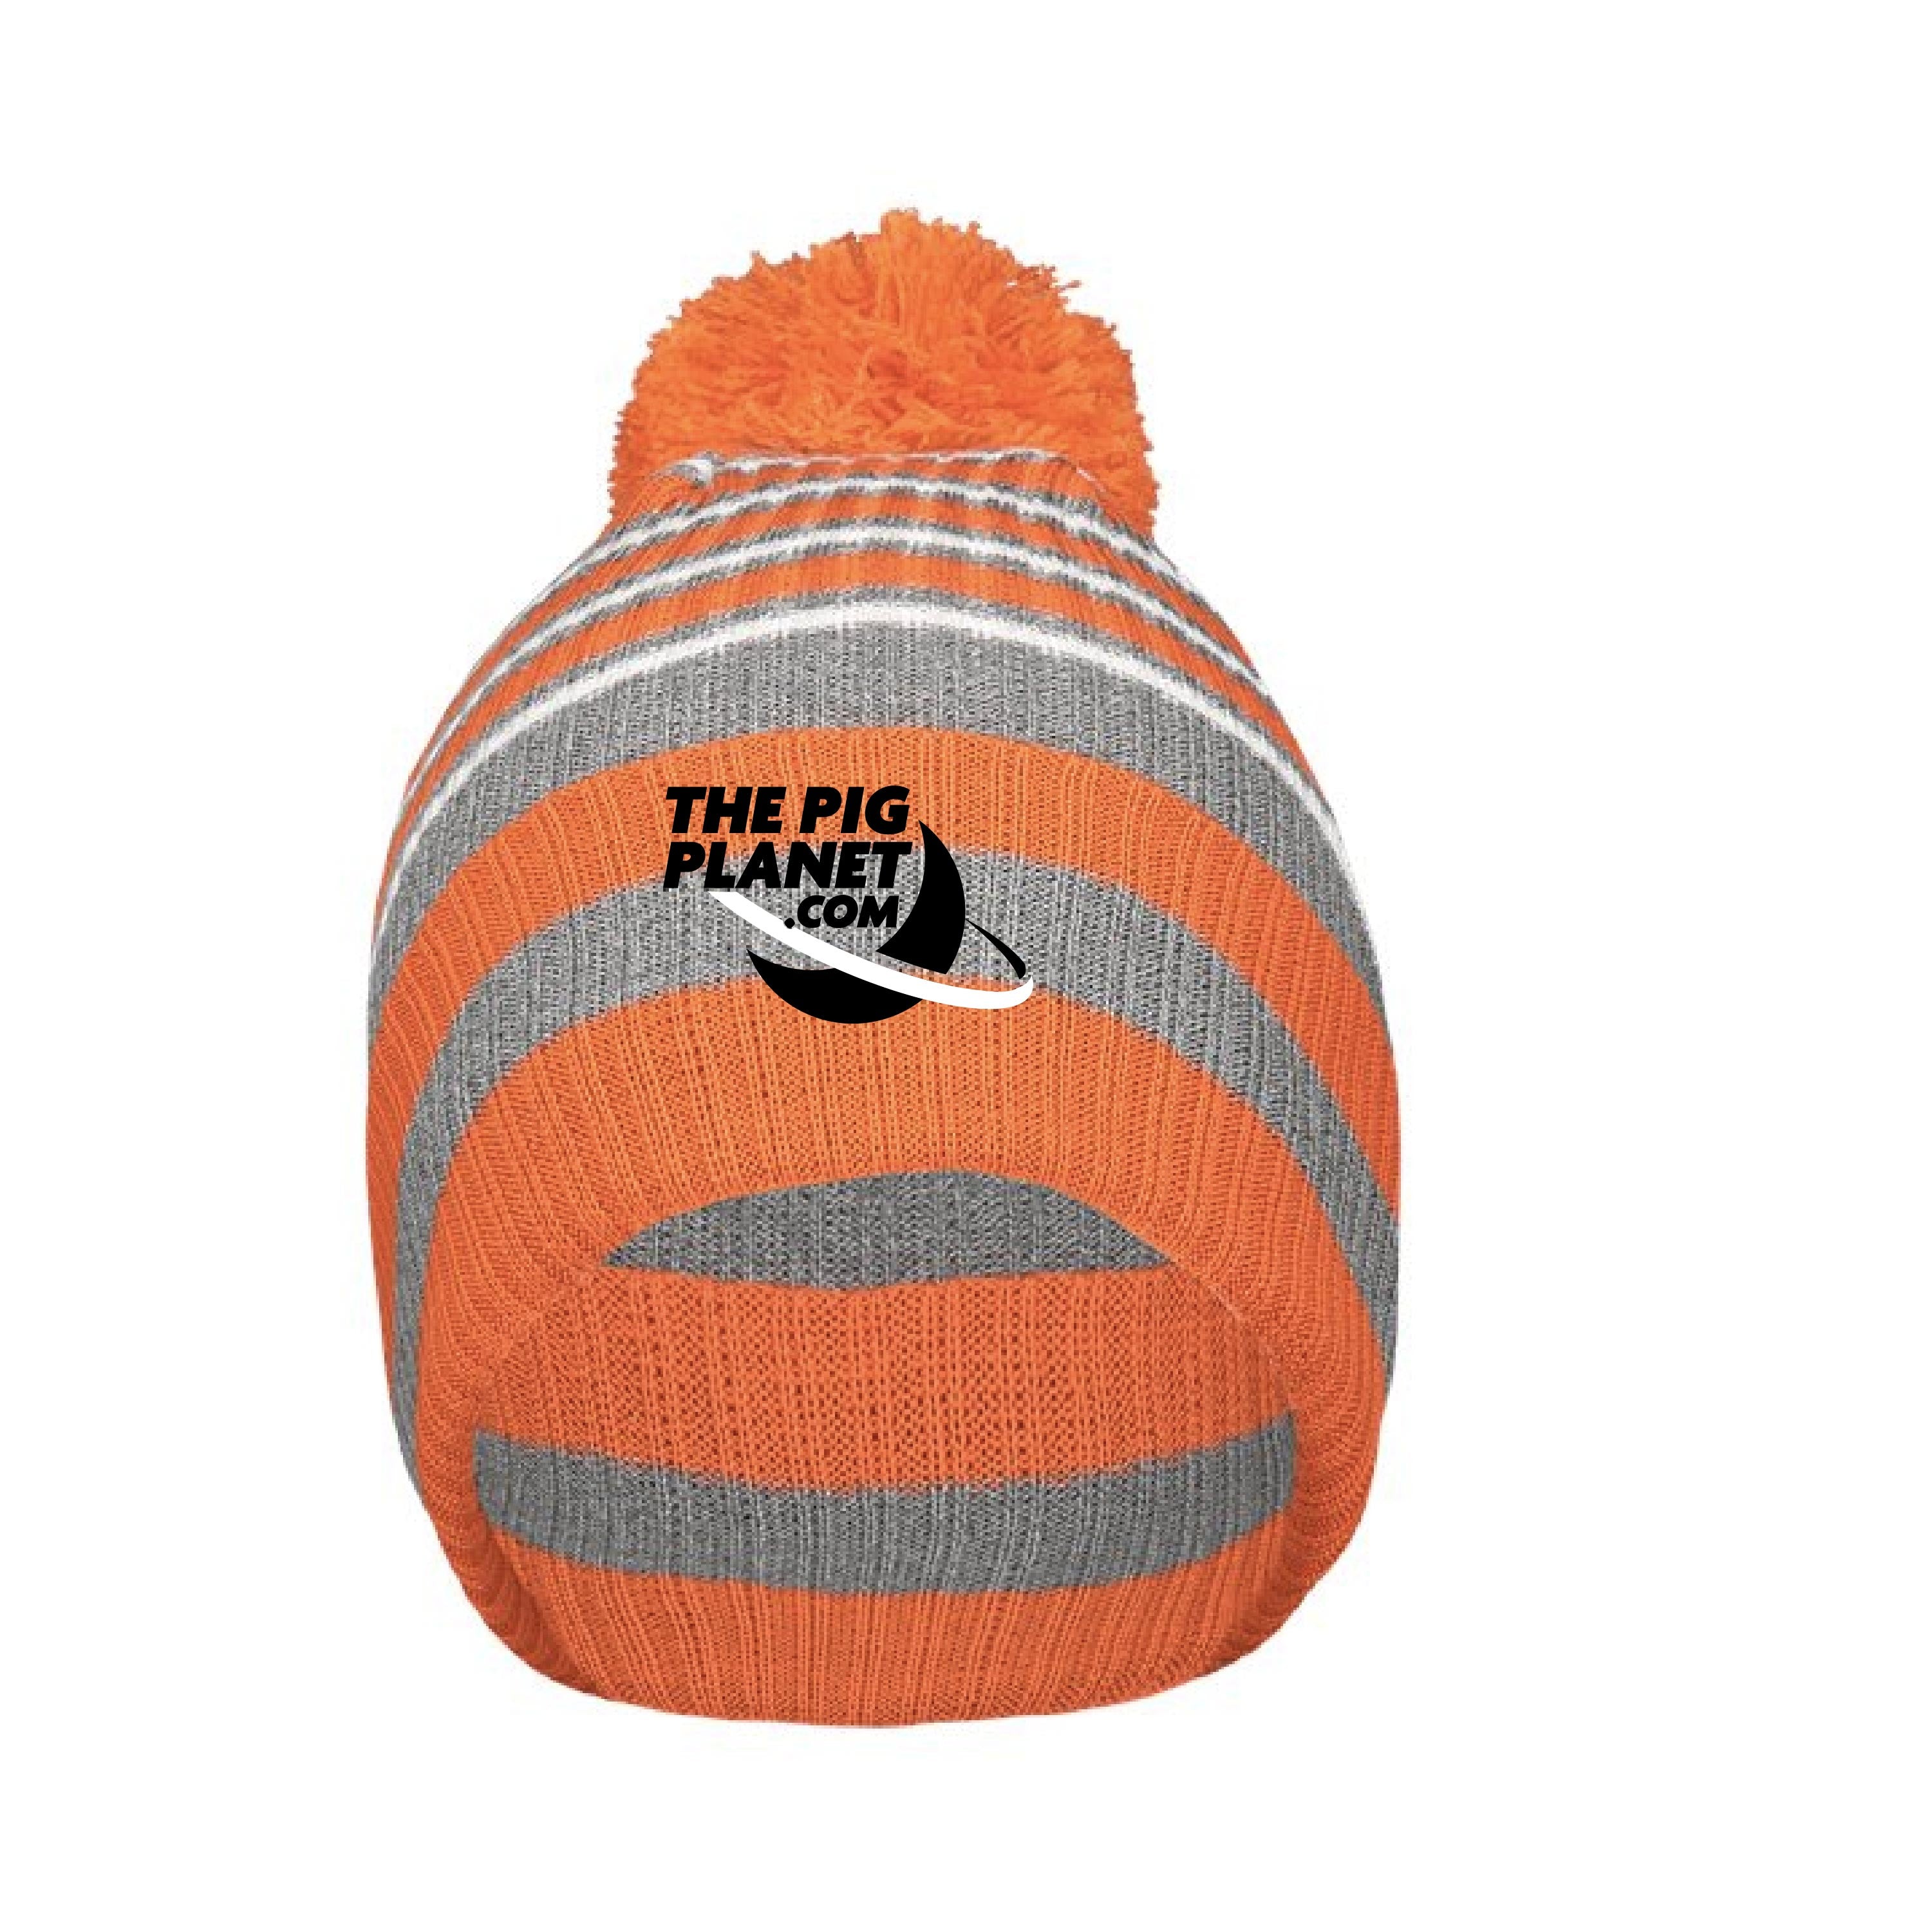 The Pig Planet Beanies